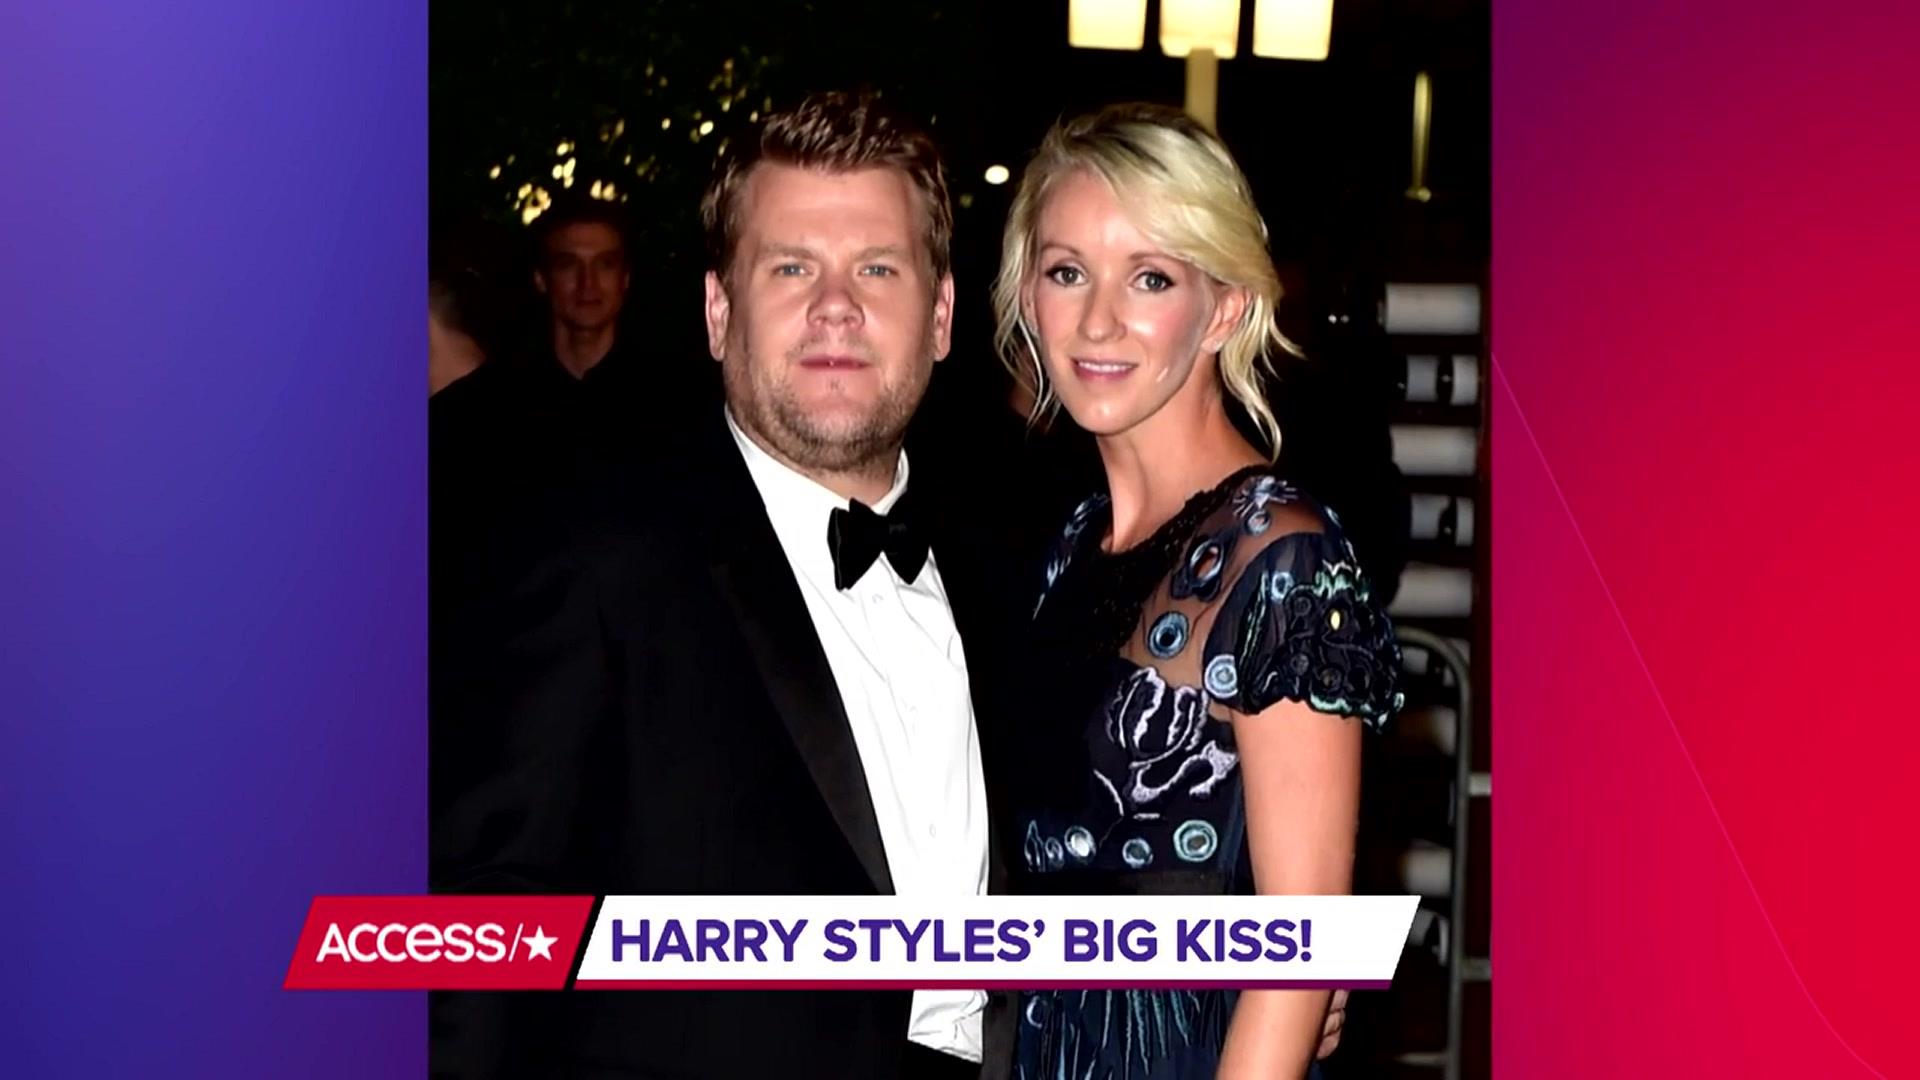 Watch Access Hollywood Highlight Harry Styles and James Cordens Carpool Karaoke Kiss image pic